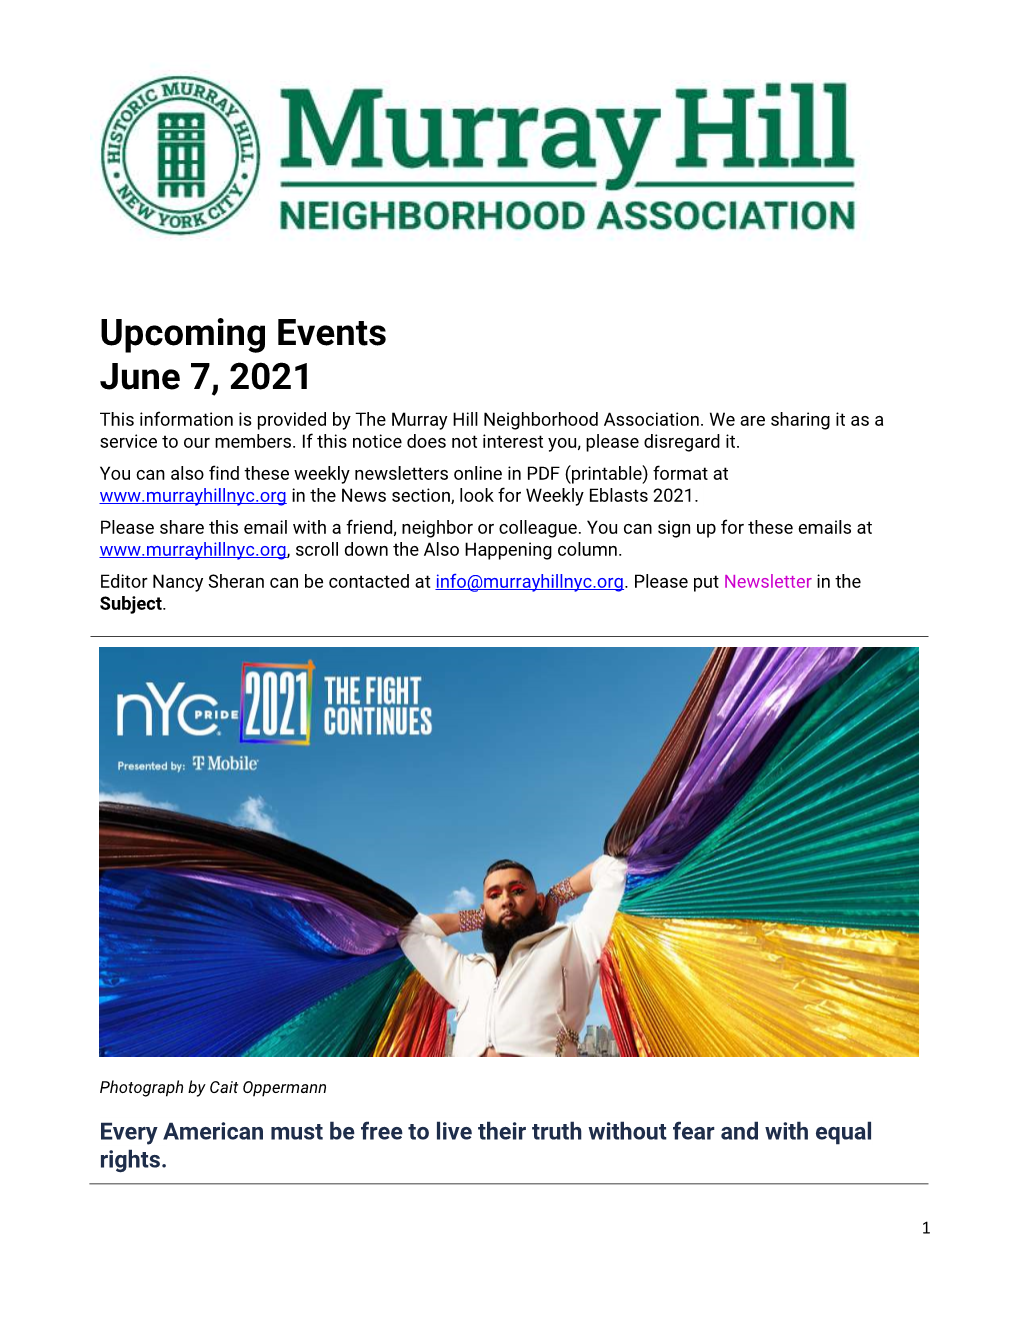 Upcoming Events June 7, 2021 This Information Is Provided by the Murray Hill Neighborhood Association